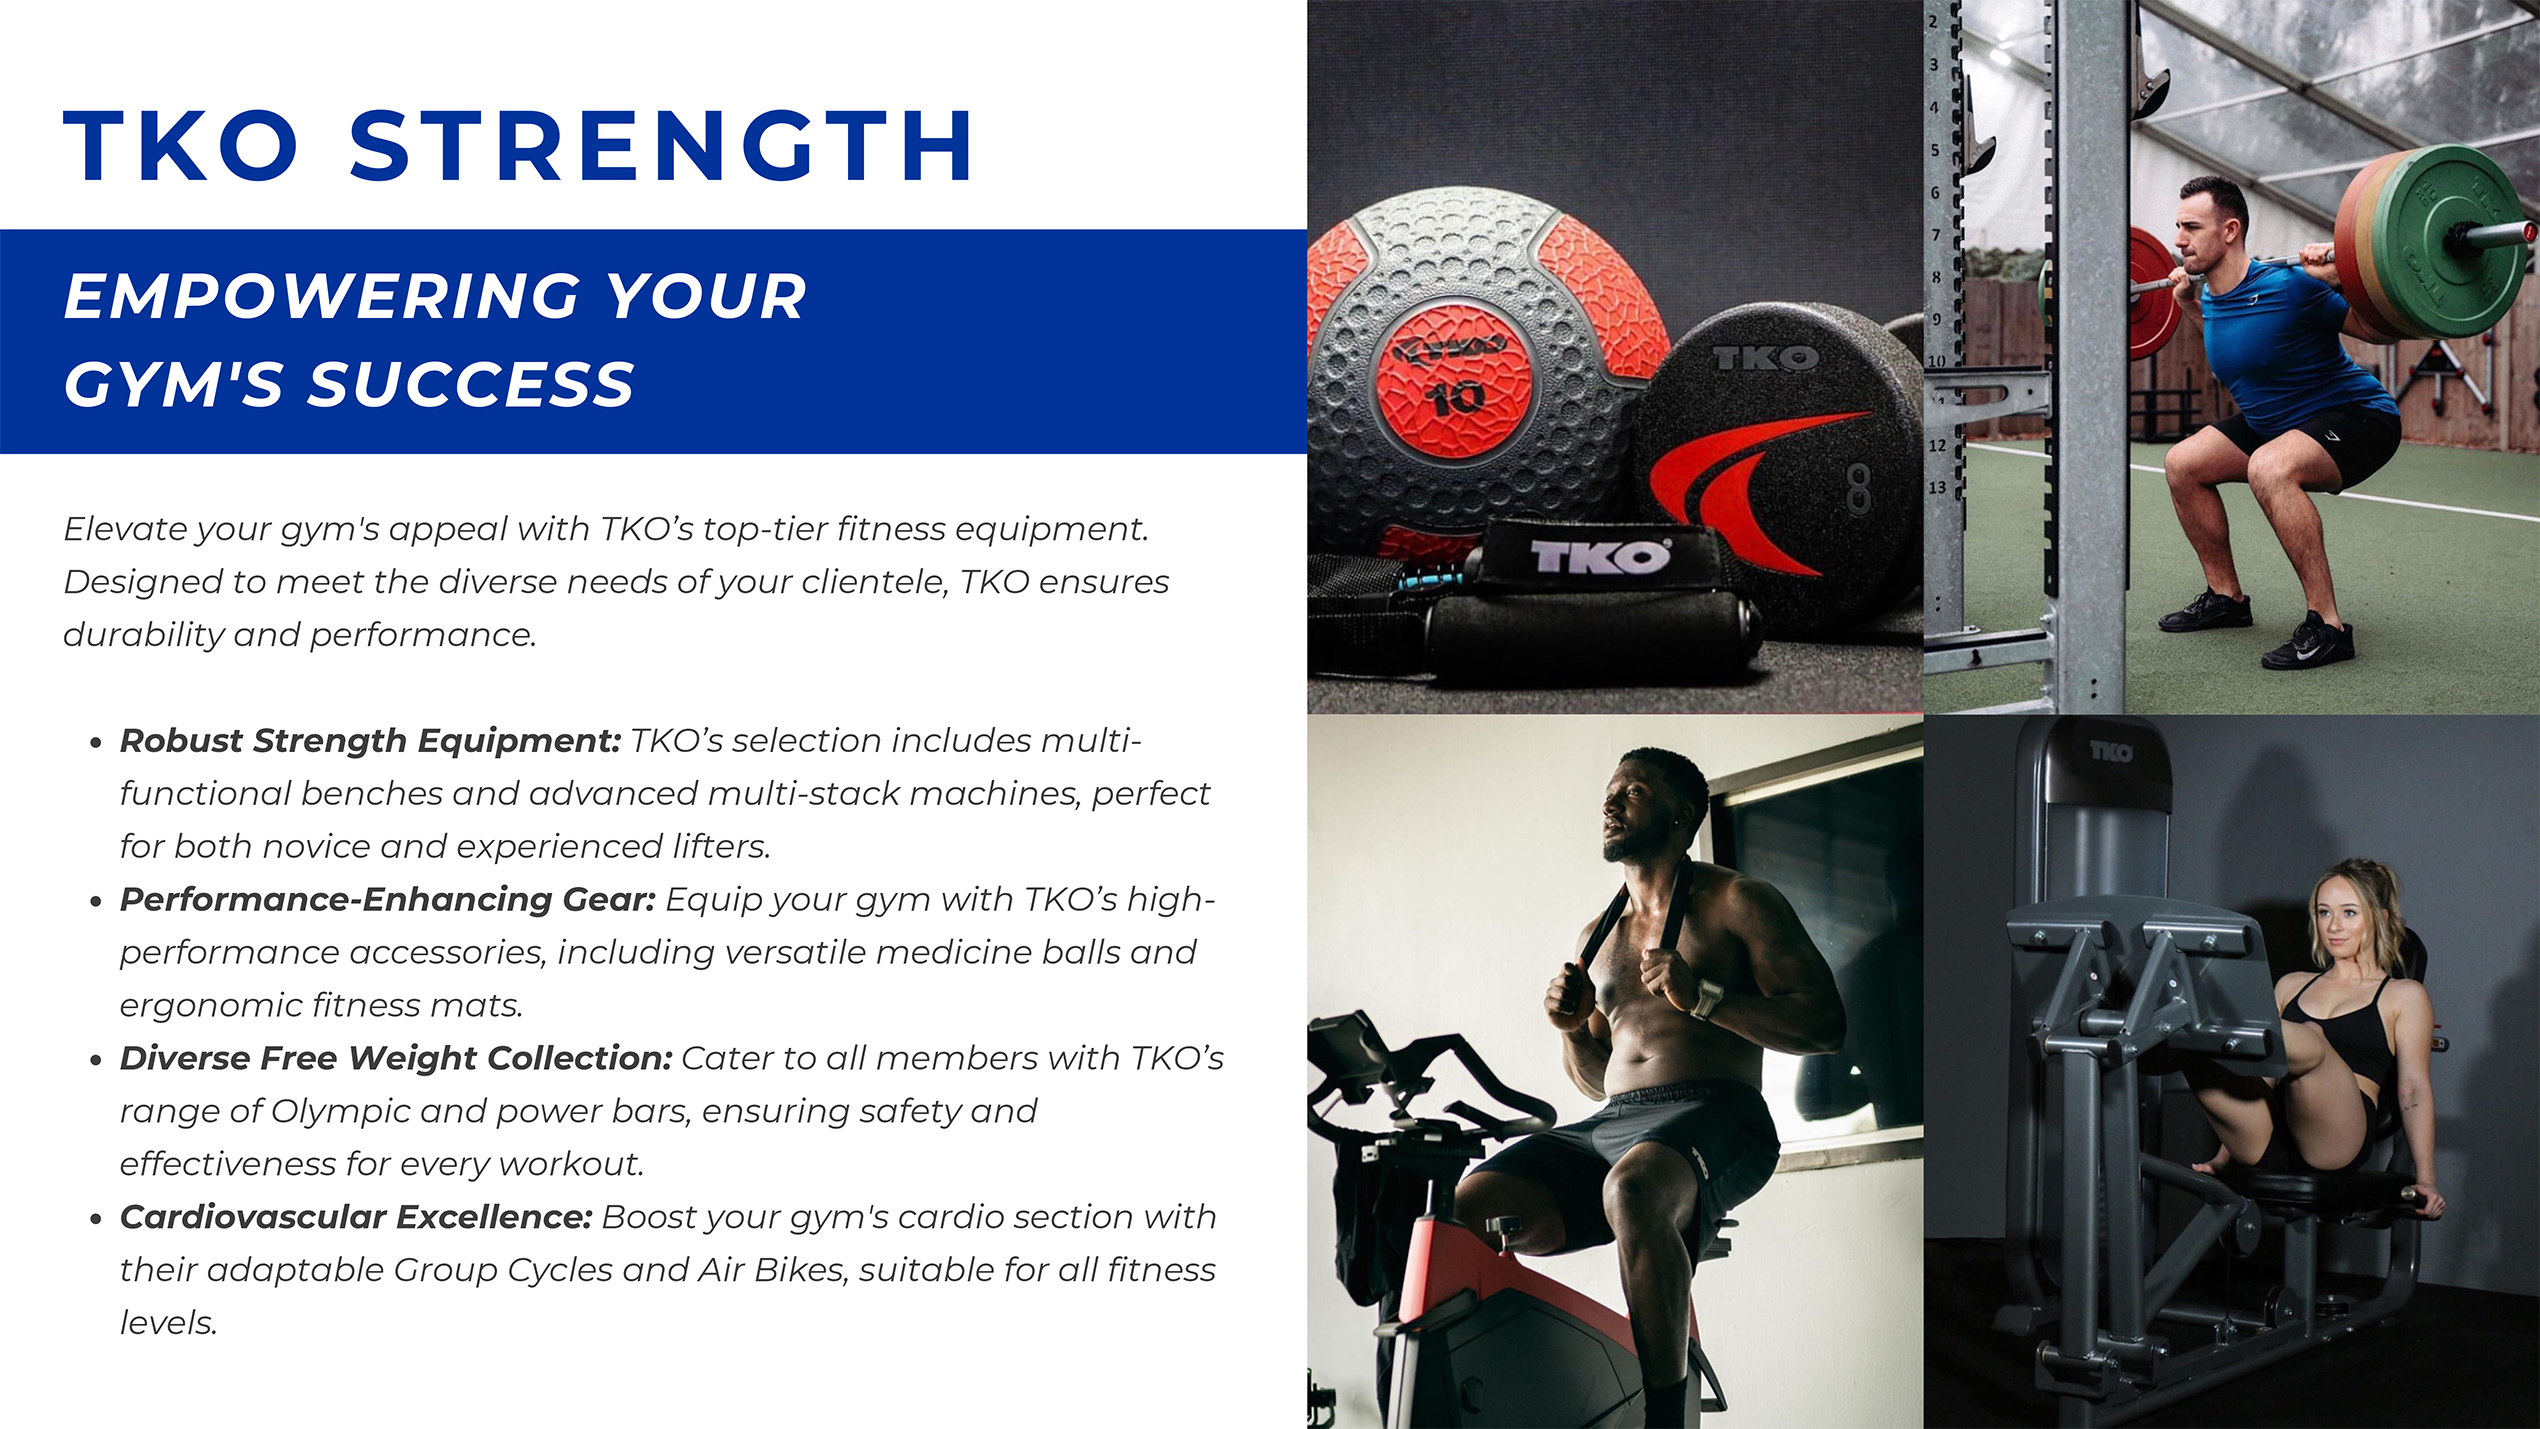 TKO Strength empowering your gym's success